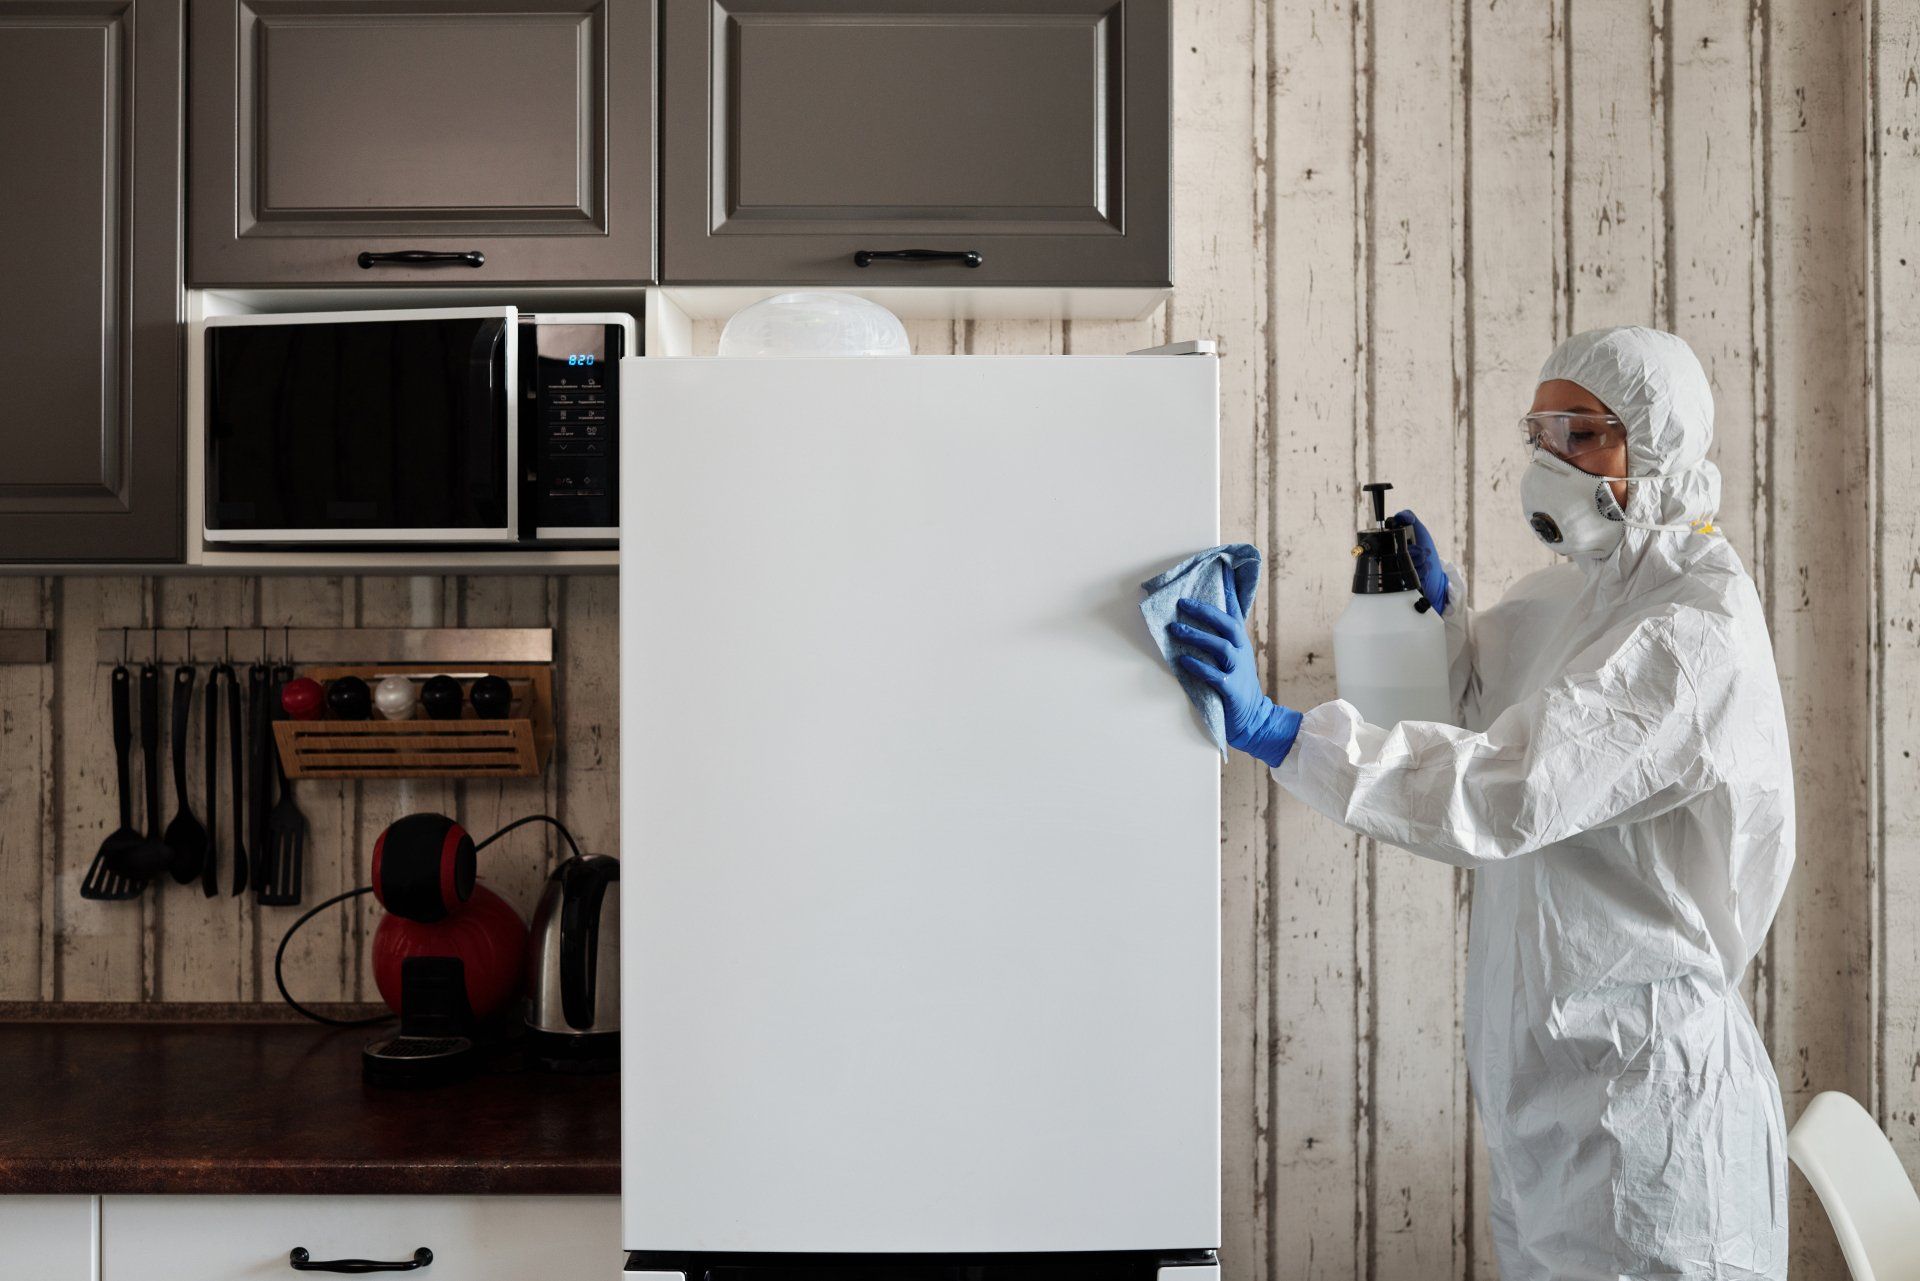 A person in a protective suit is cleaning a refrigerator in a kitchen.